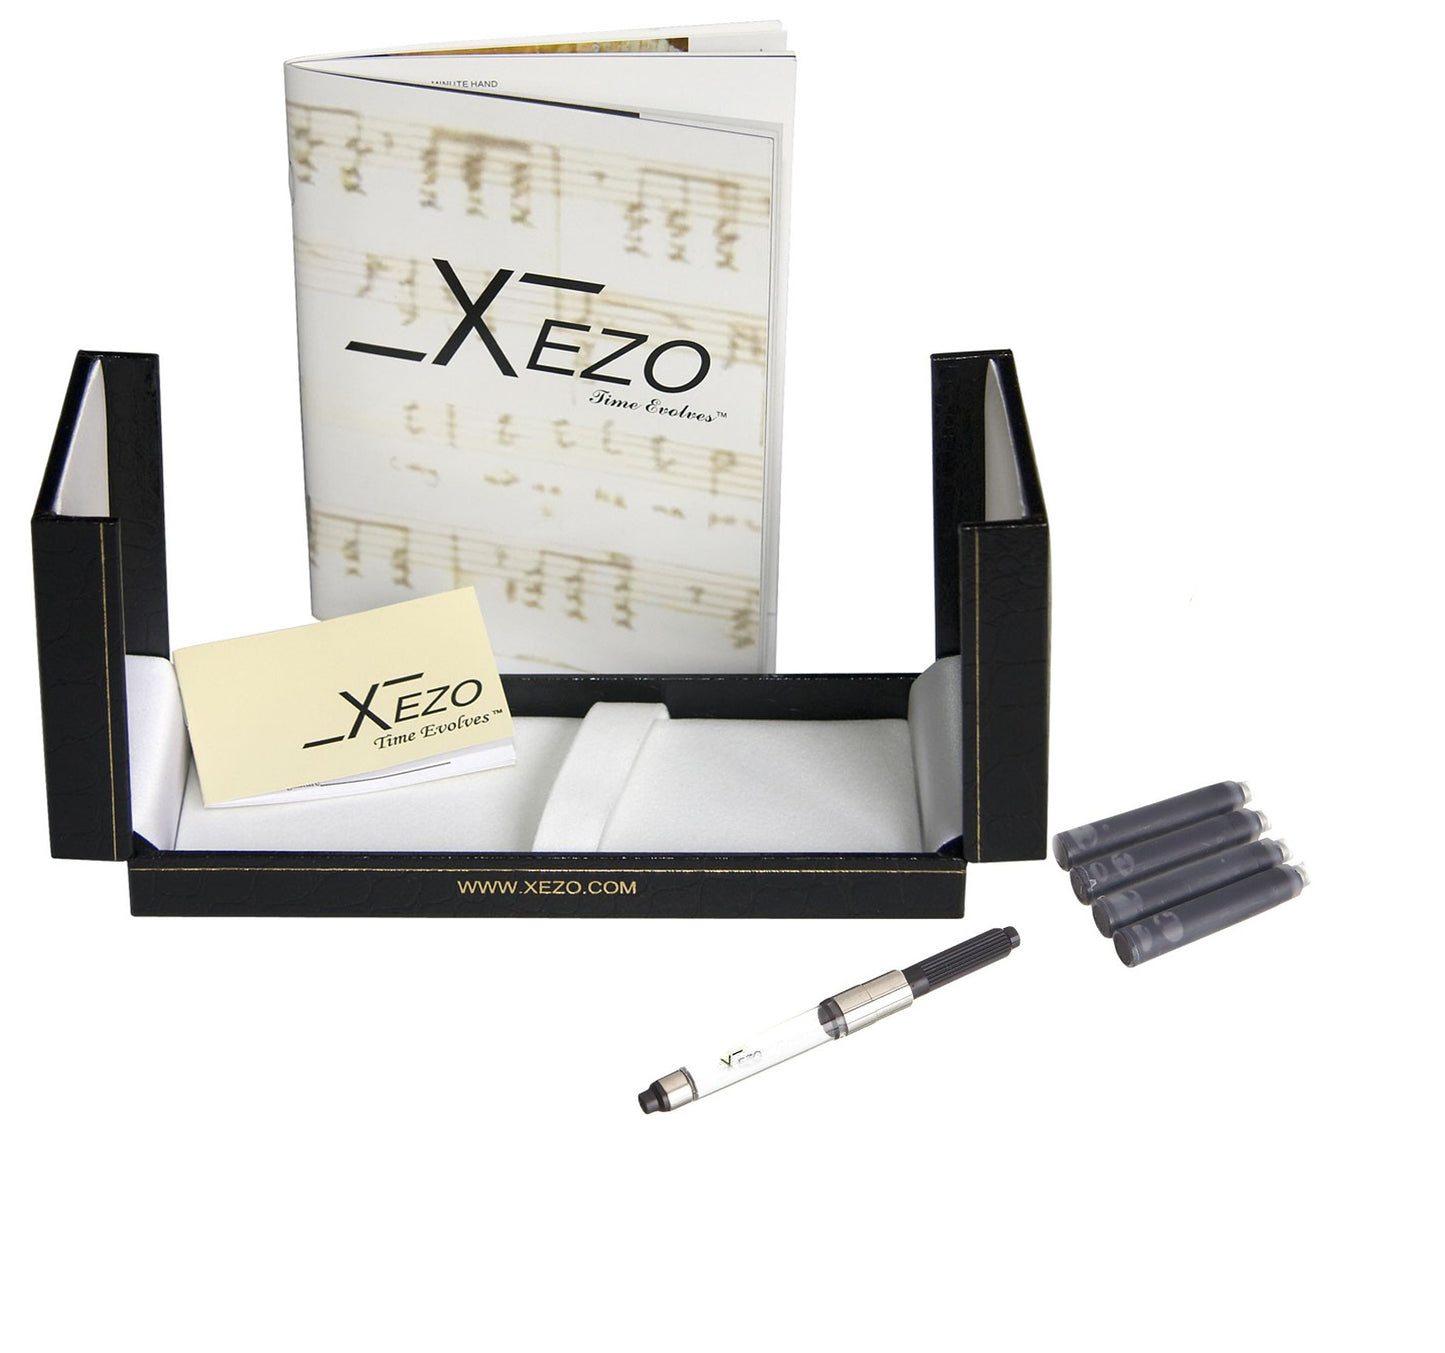 Xezo - Black gift box, certificate, manual, chrome-plated ink converter, and four ink cartridges of the Maestro LeGrand Moldavite F fountain pen